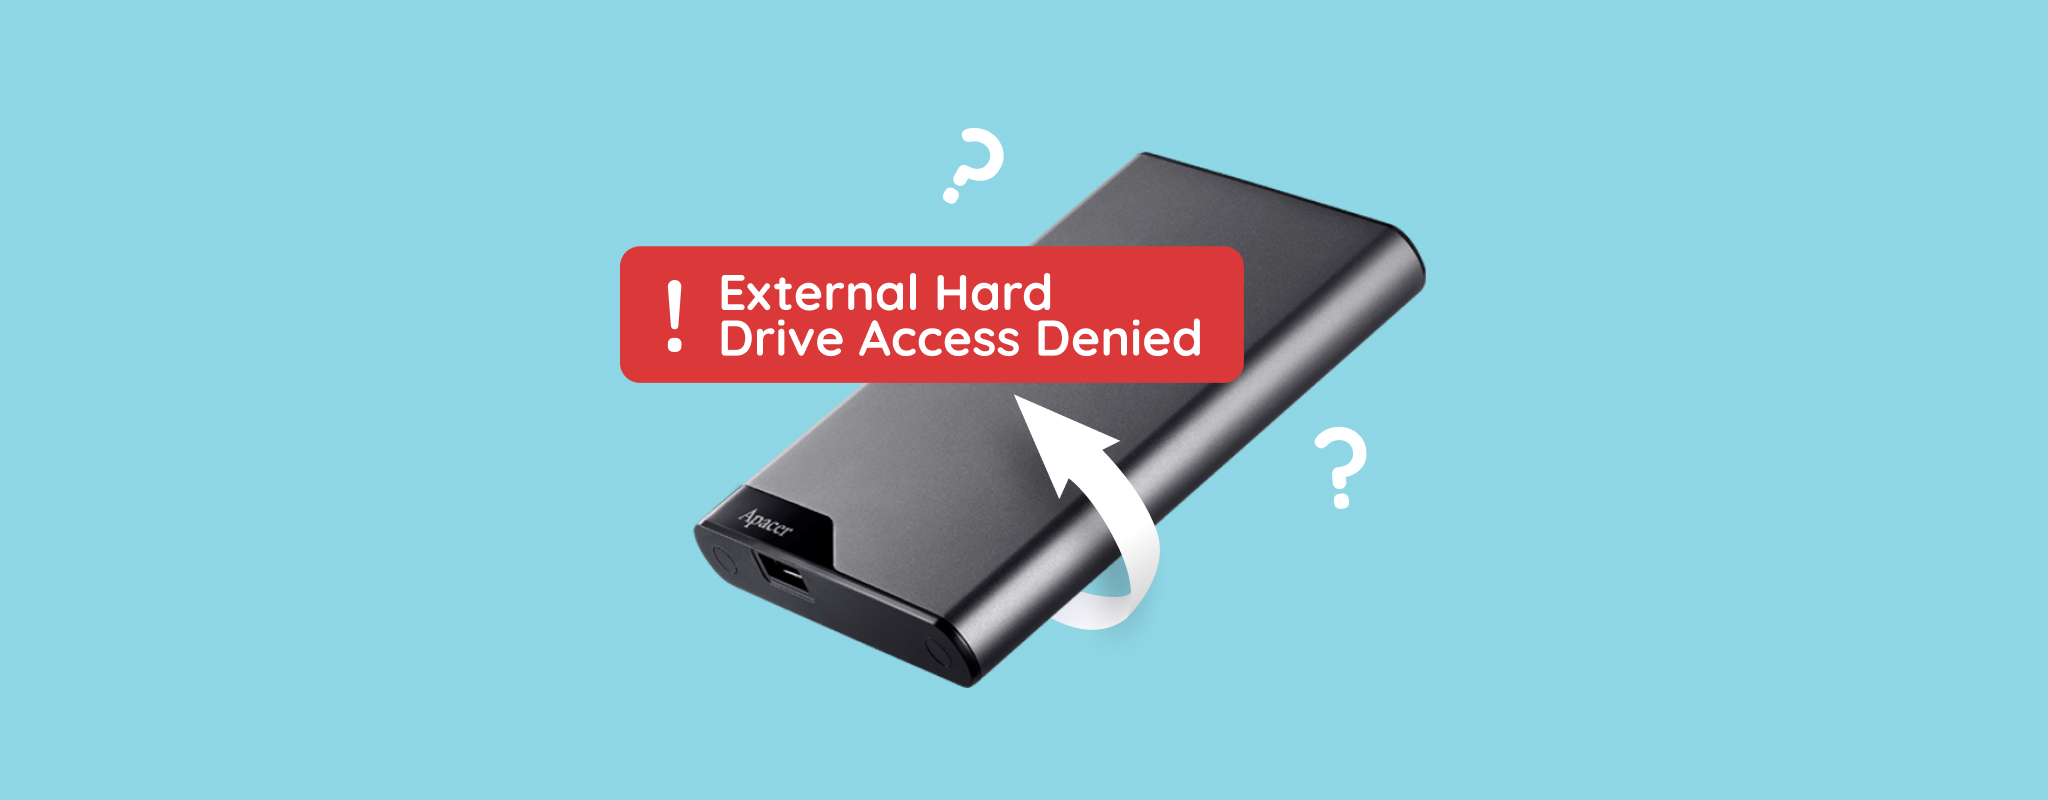 This step should only be considered as a last resort if all other methods fail.
Backup all your important files and data to an external storage device.